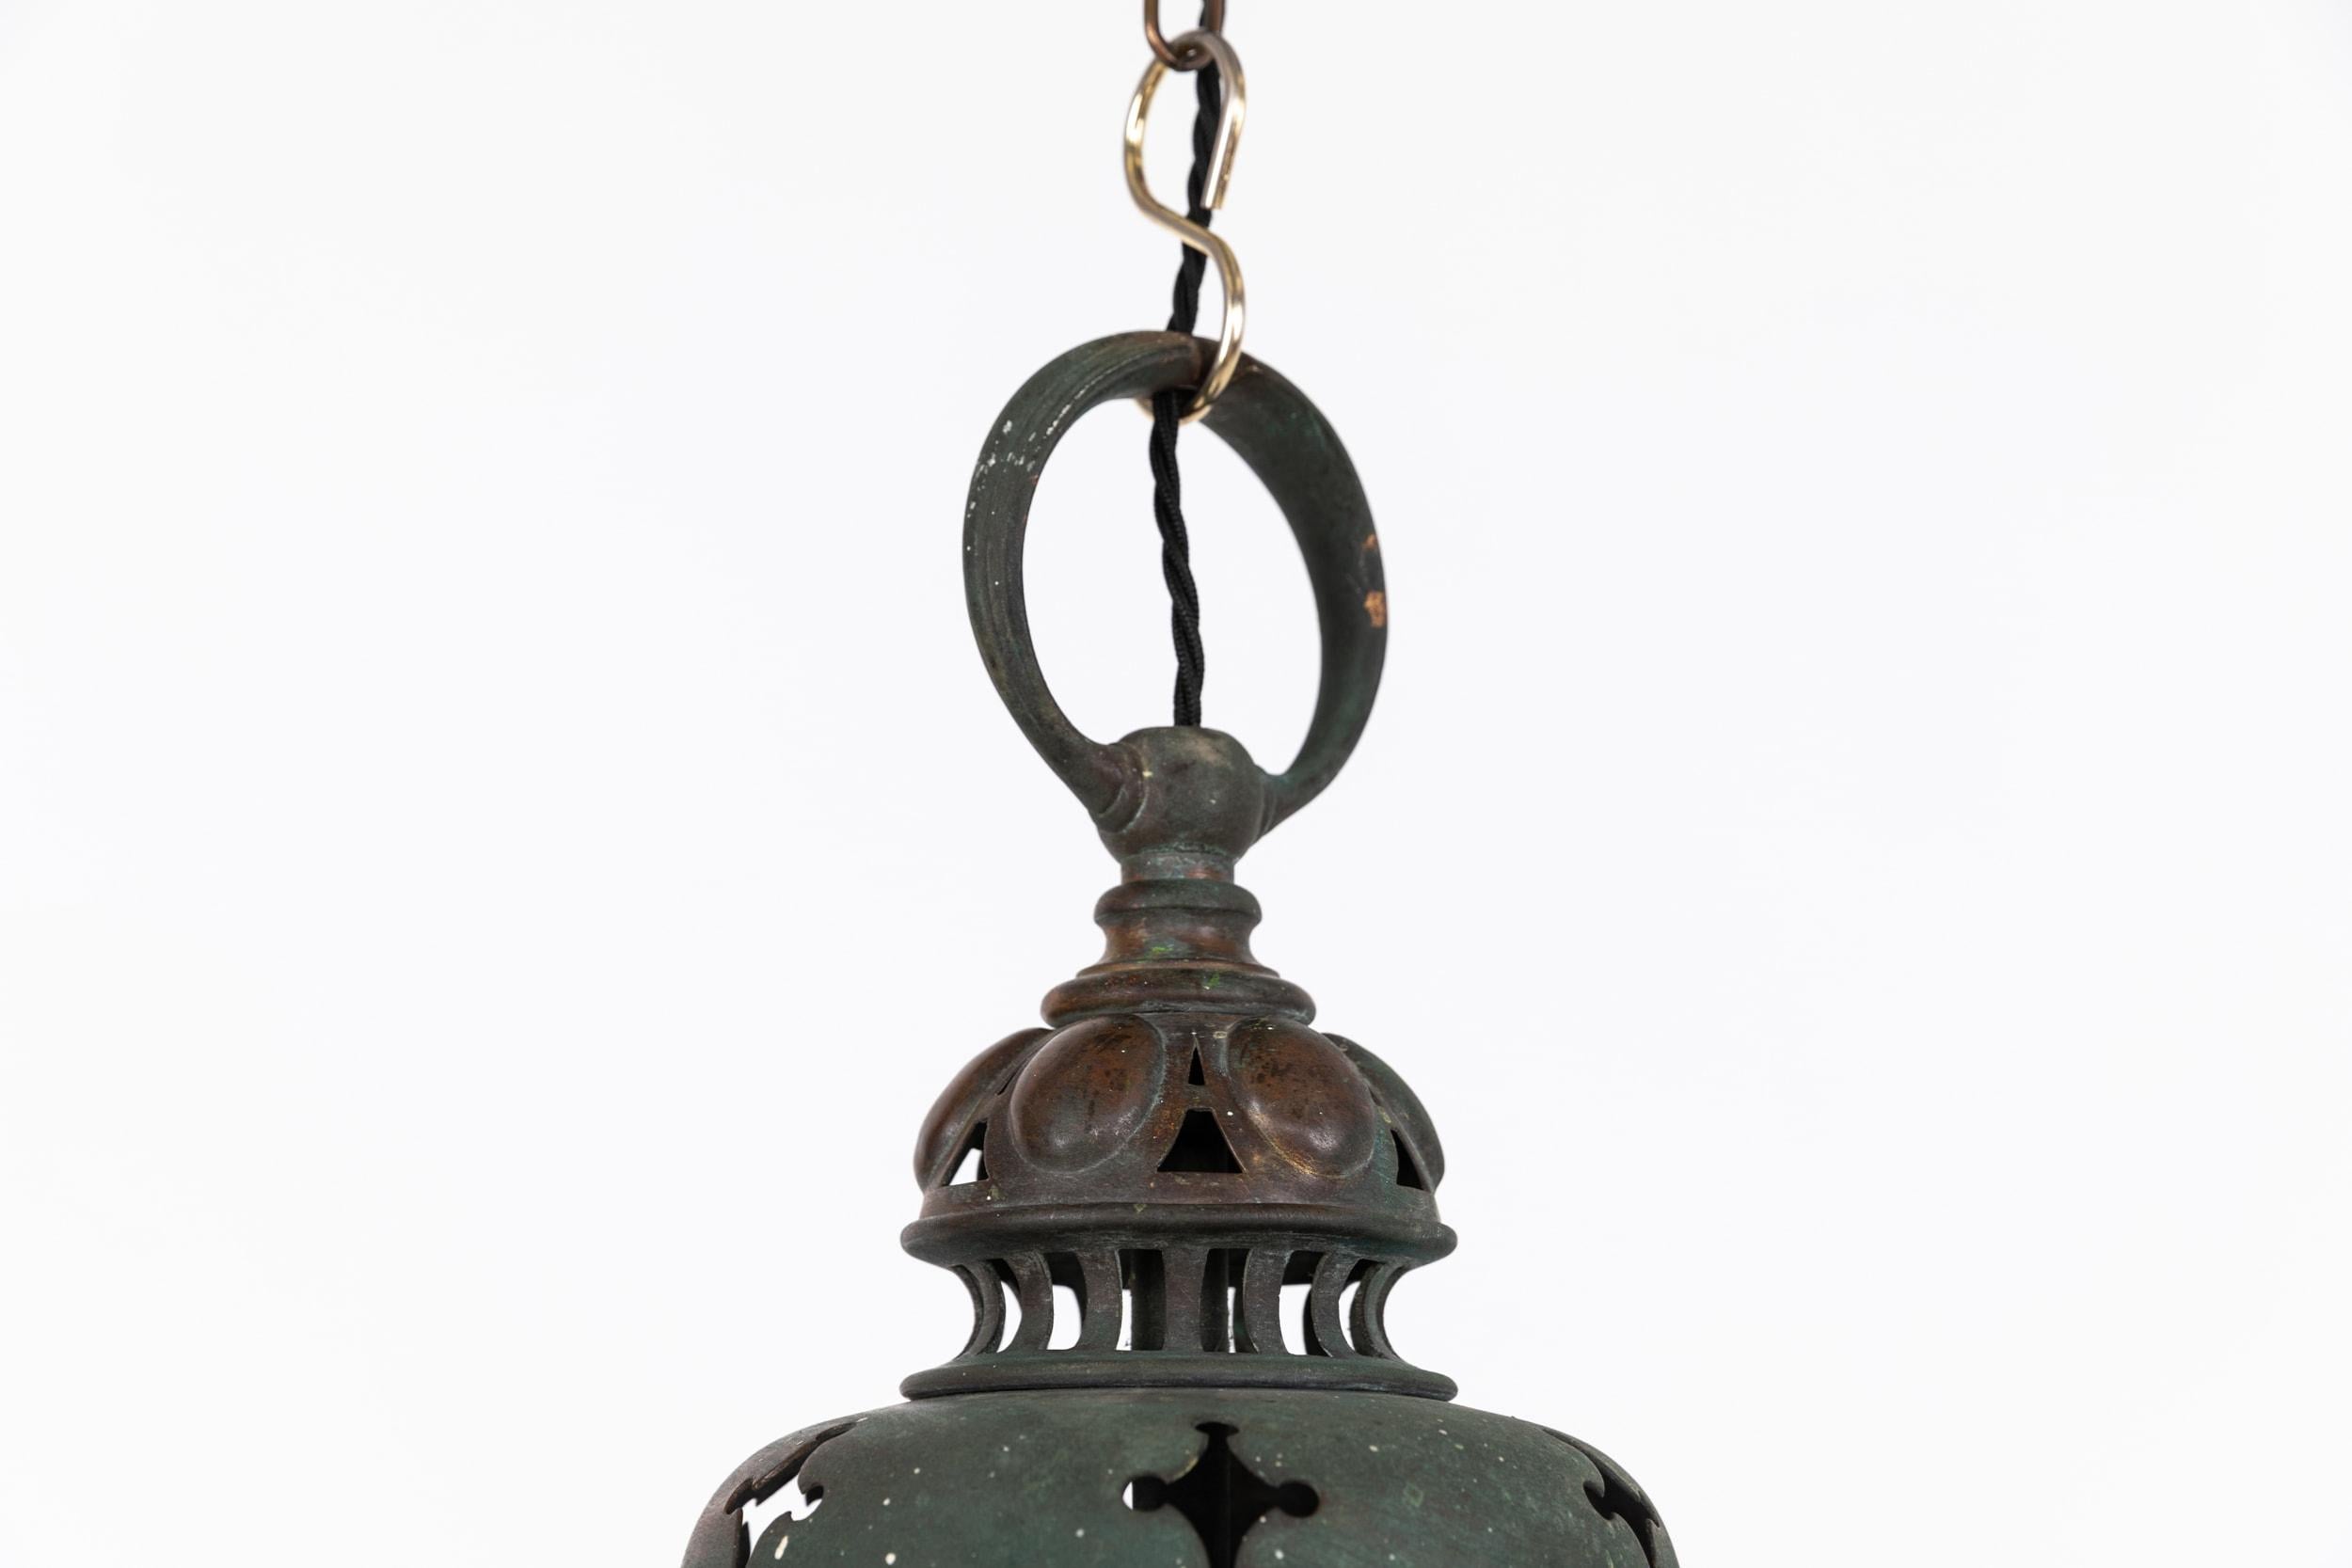 A beautifully formed early 20th century lantern made by F&C Osler. c.1920

Heavy duty cast brass construction which has aged perfectly, featuring the hanging loop which adorns lots of pendant lighting of the period made by Osler.

Rewired with 1m of